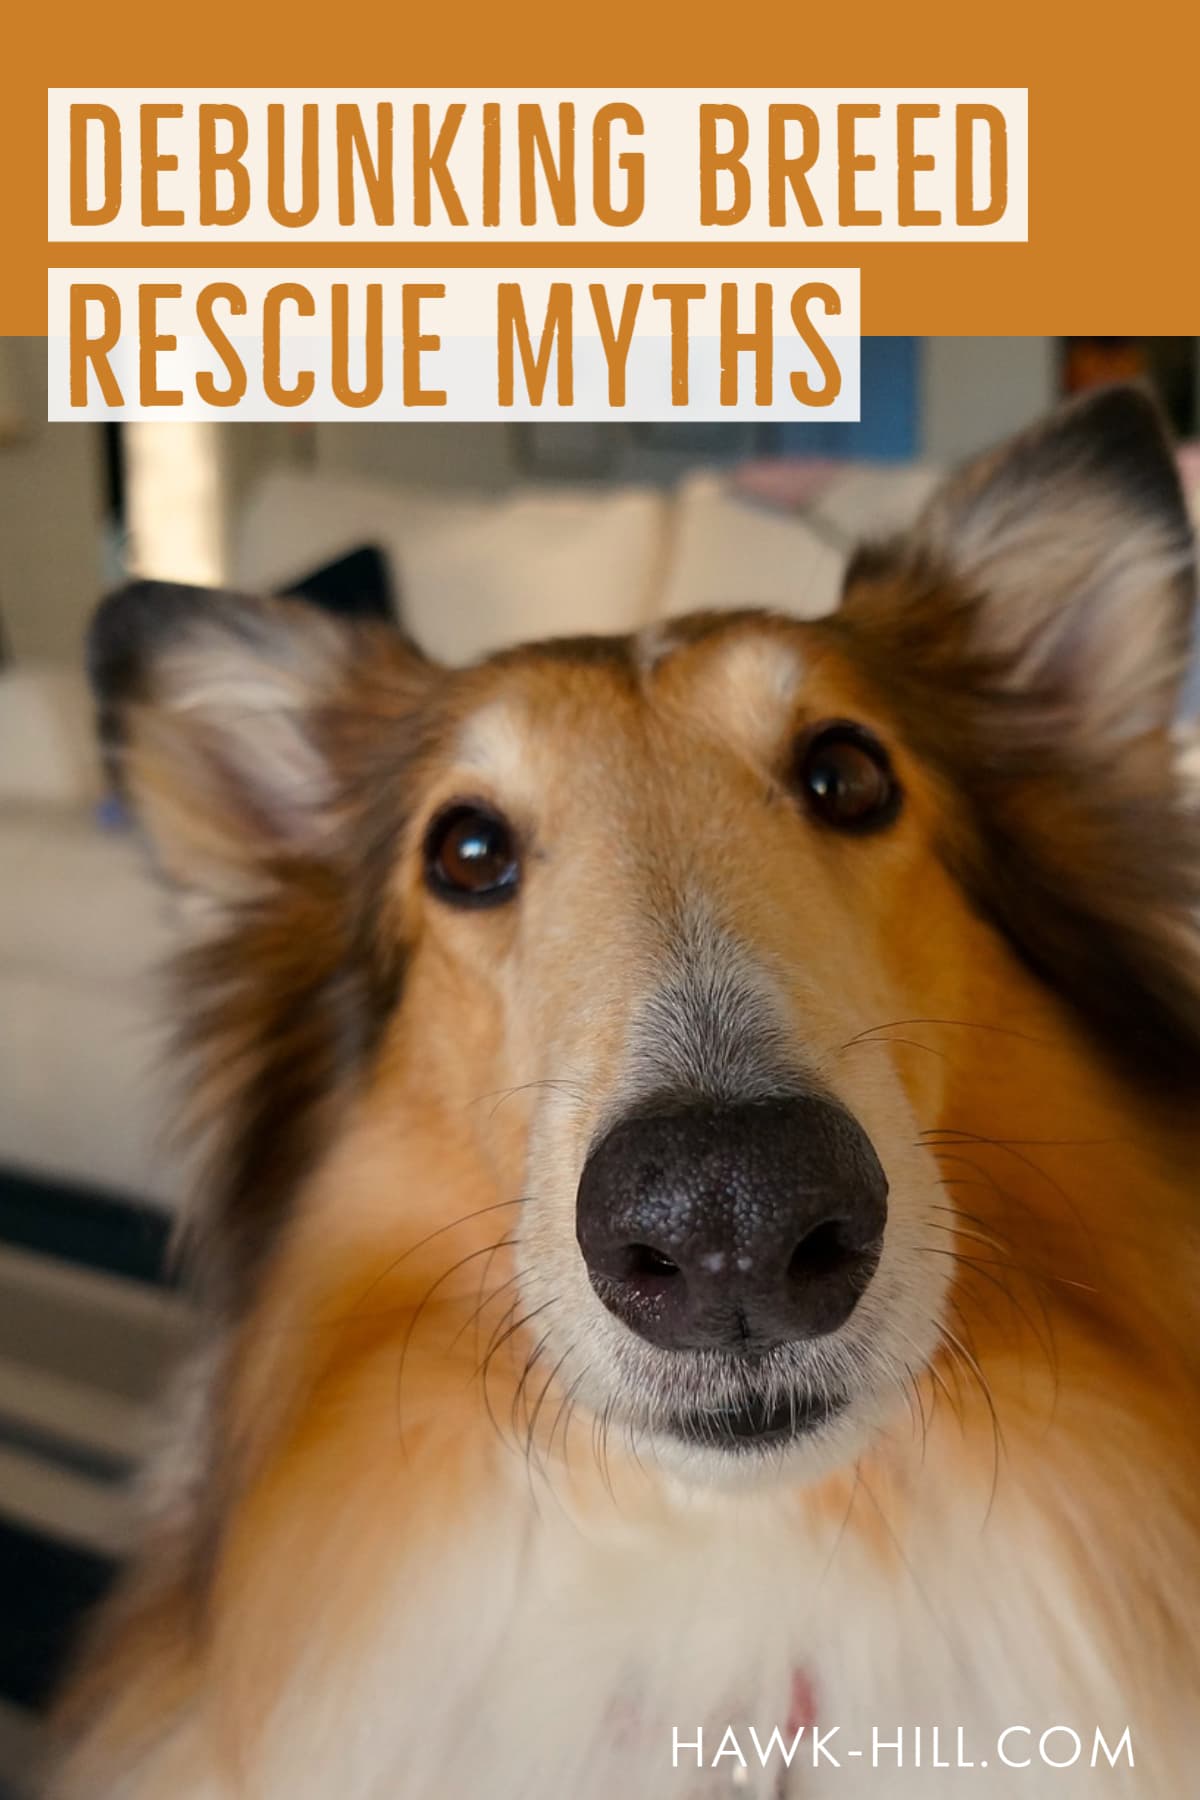 Debunking breed rescue myths what it's like to adopt a dog from a breed rescue